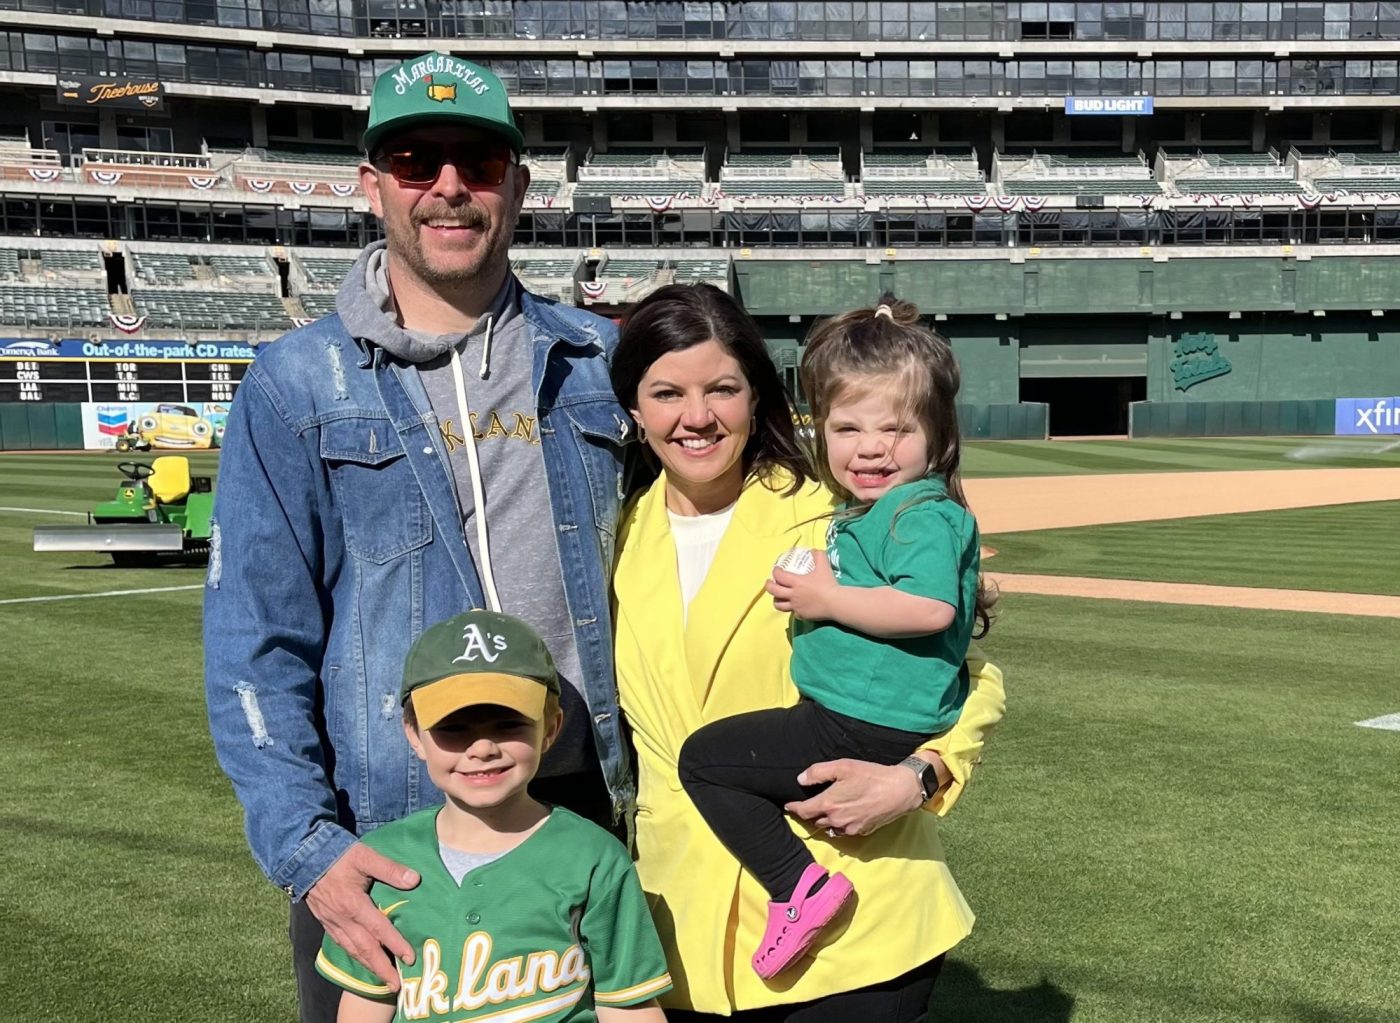 mother’s-day:-what-a’s-broadcaster-jenny-cavnar-learned-from-her-mom-and-is-sharing-with-her-own-kids